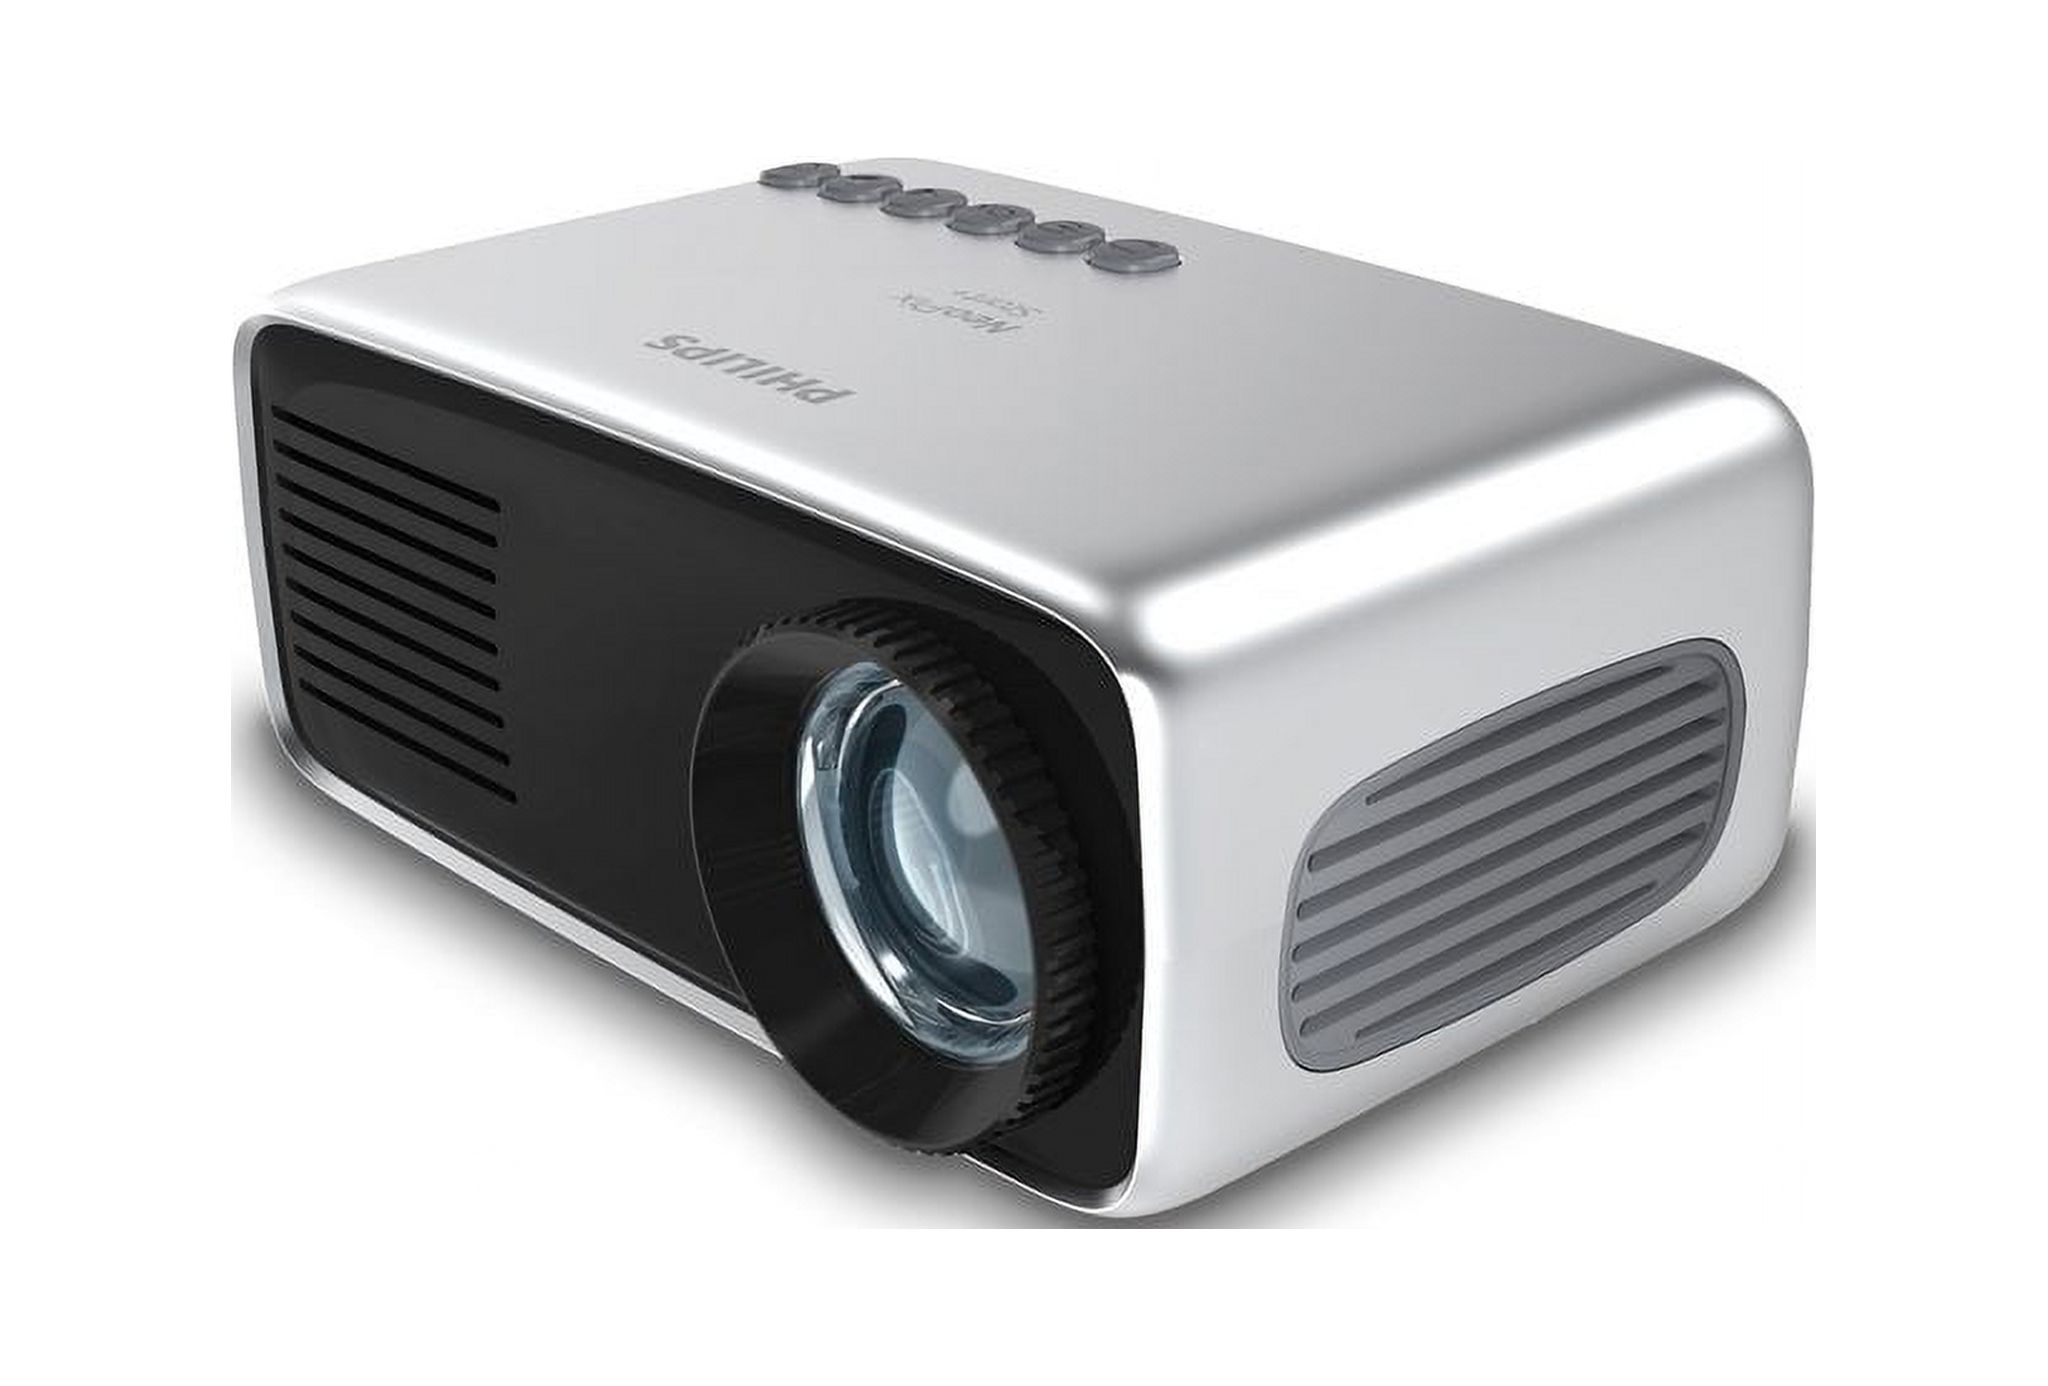 Philips NeoPix Start, Mini Projector, 60" Display, Built-in Media Player, HDMI, USB, micro SD, 3.5mm Audio Out Headphone Jack - image 1 of 3